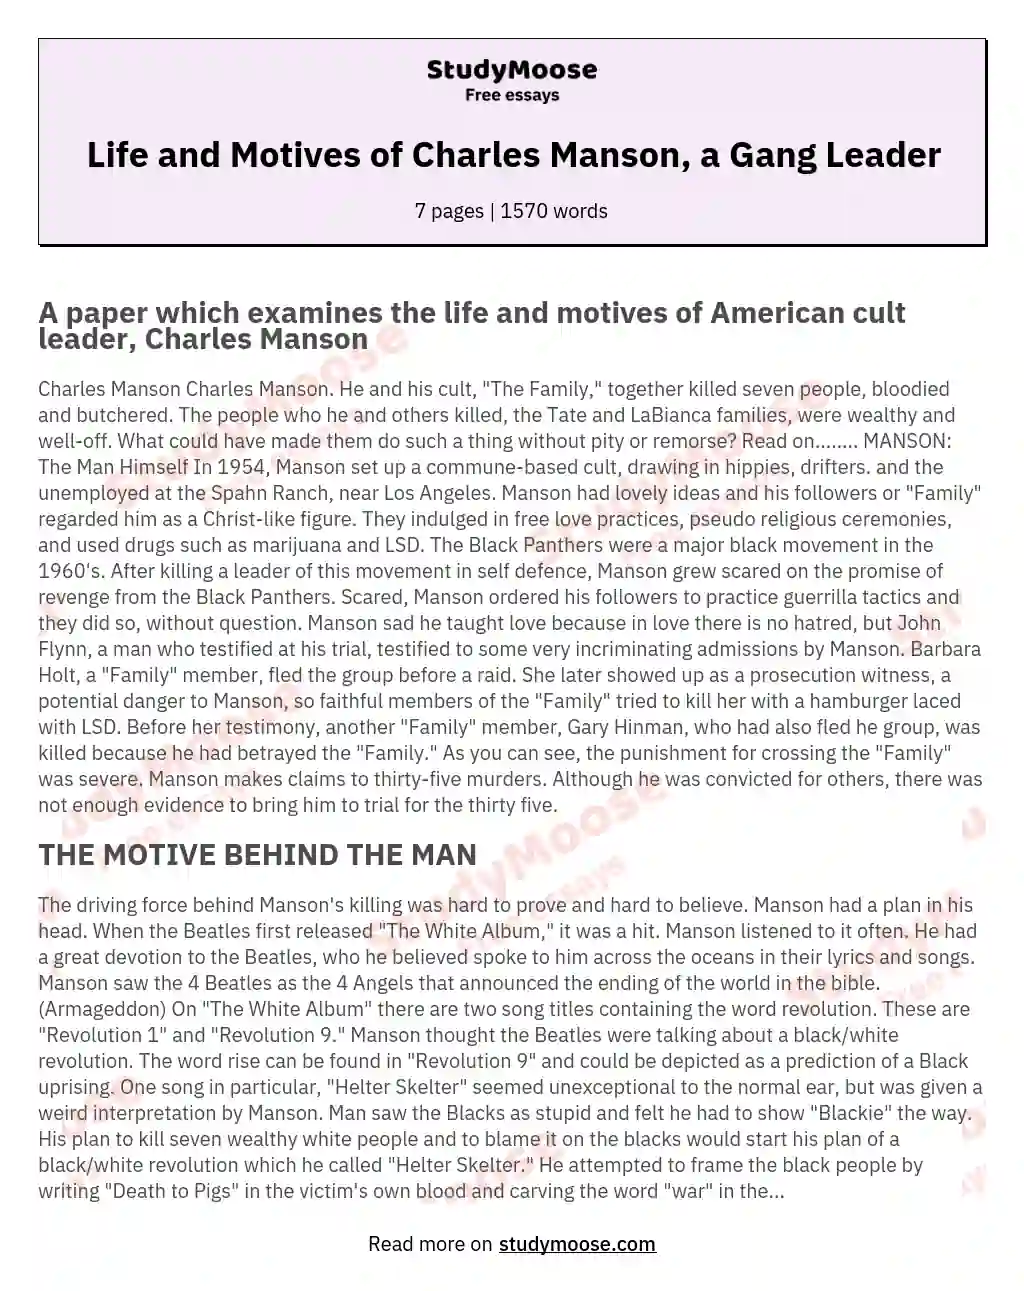 Life and Motives of Charles Manson, a Gang Leader essay